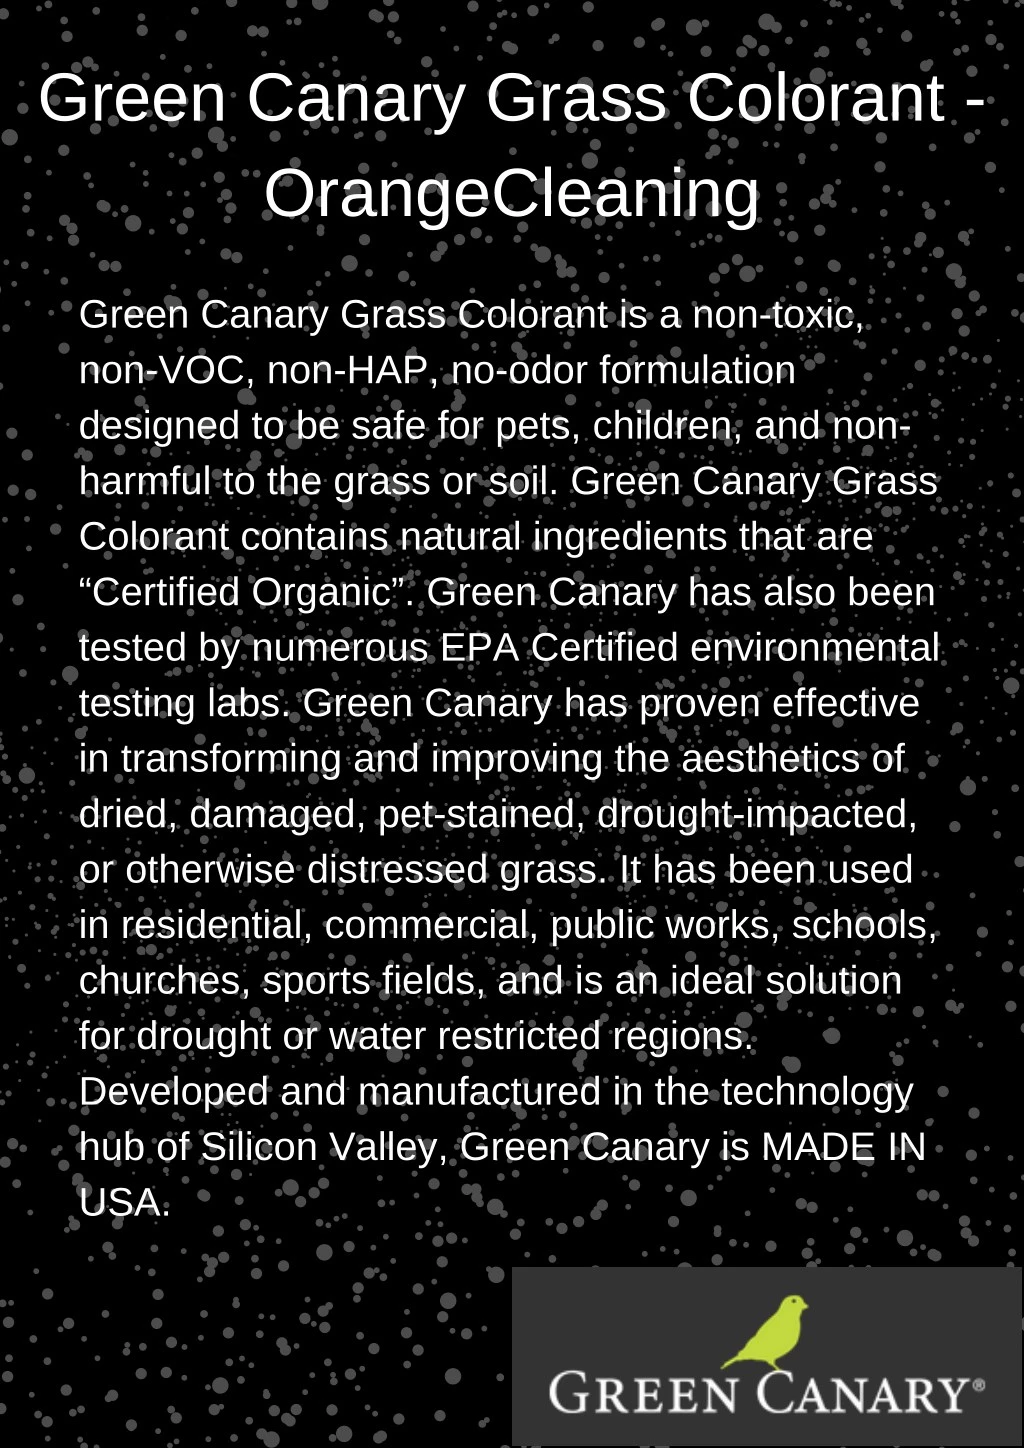 green canary grass colorant orangecleaning